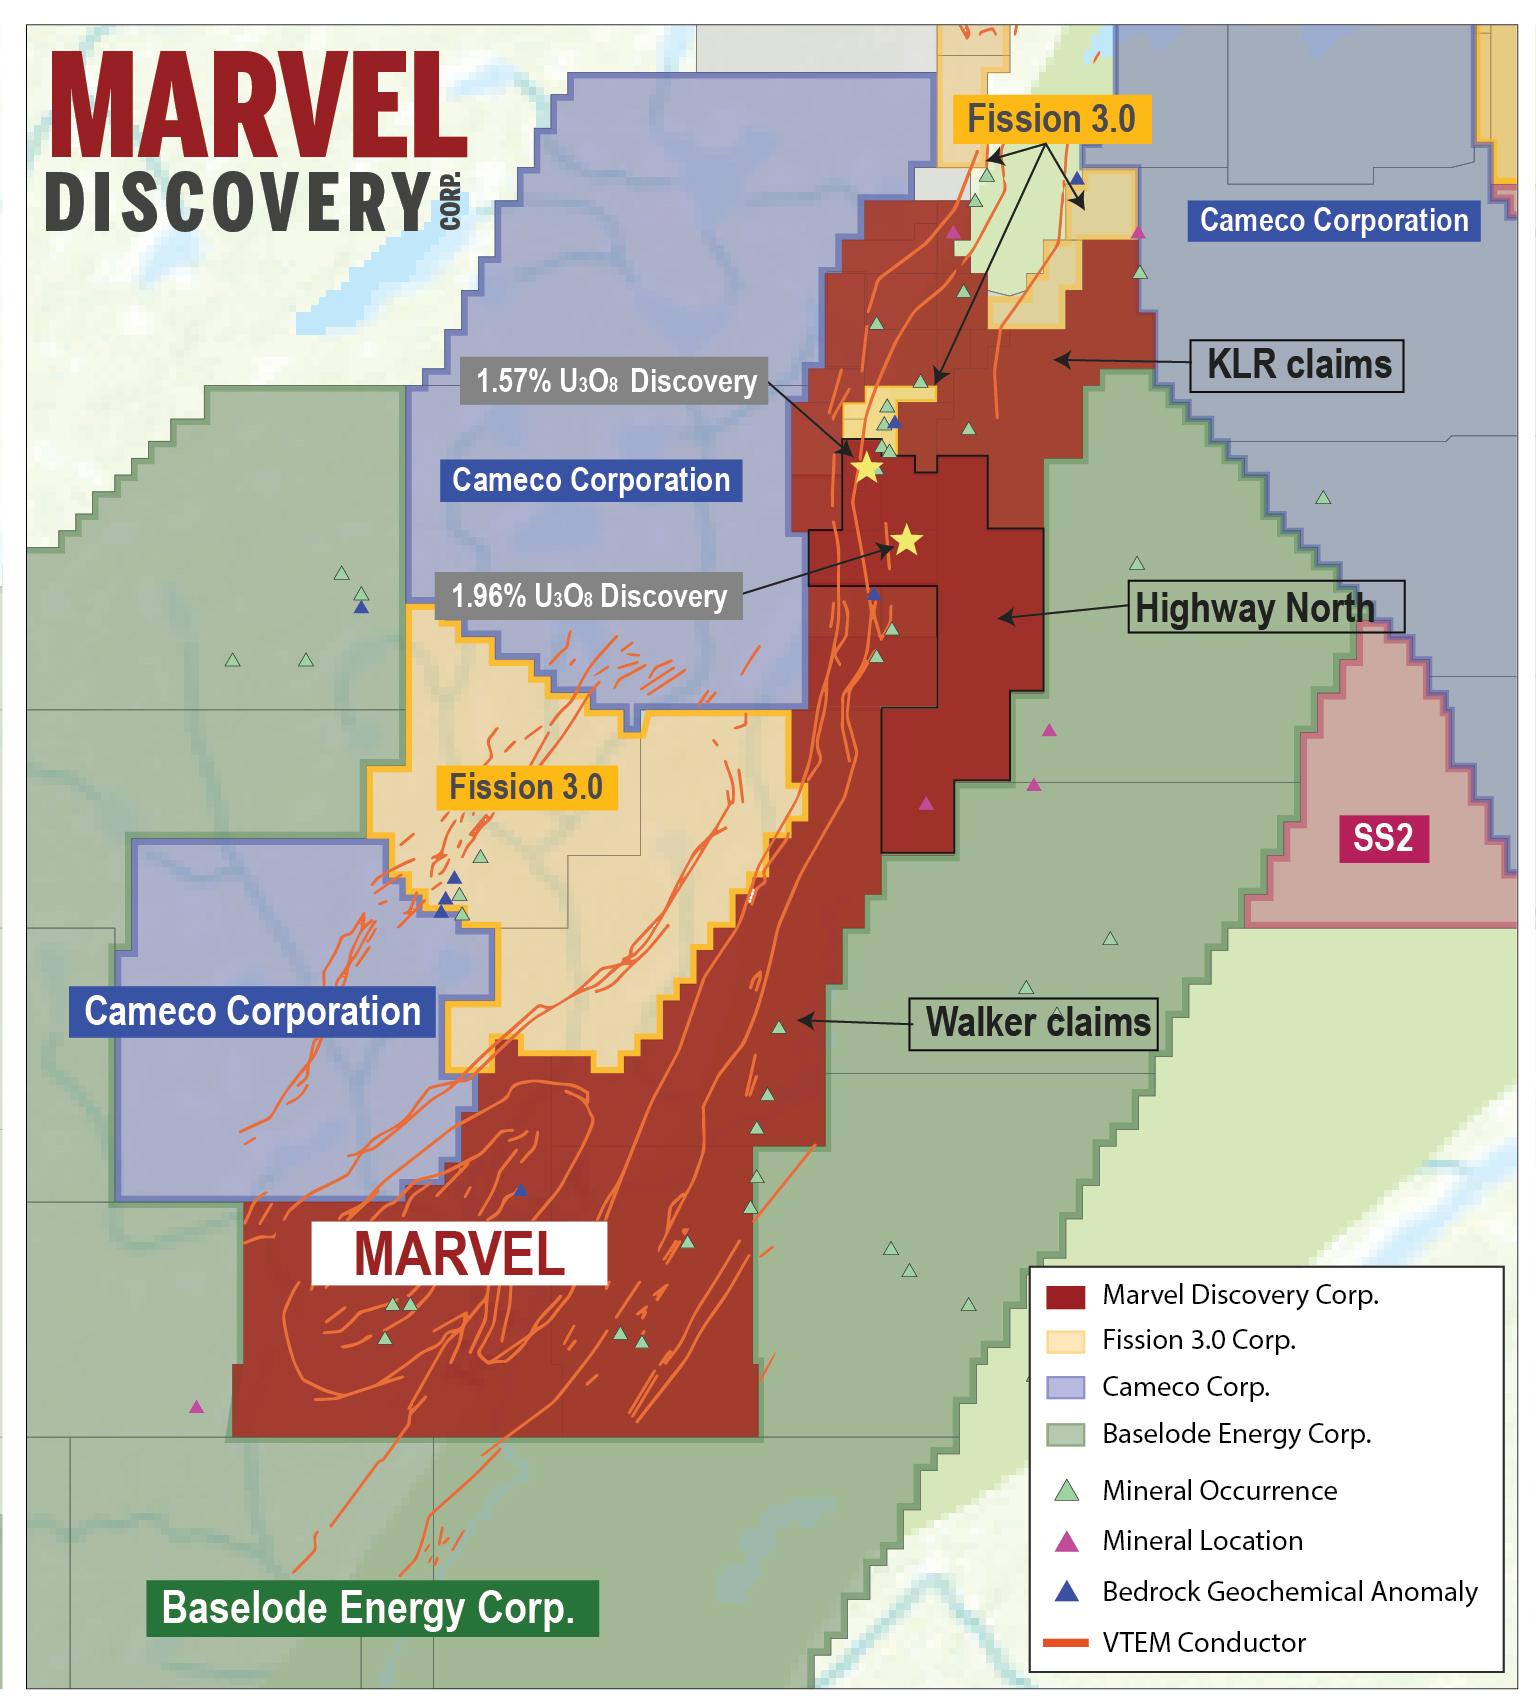 Uranium property Marvel Discovery Corp 05 Post Highway North, KLR, & Walker Claims - Athabasca Basin